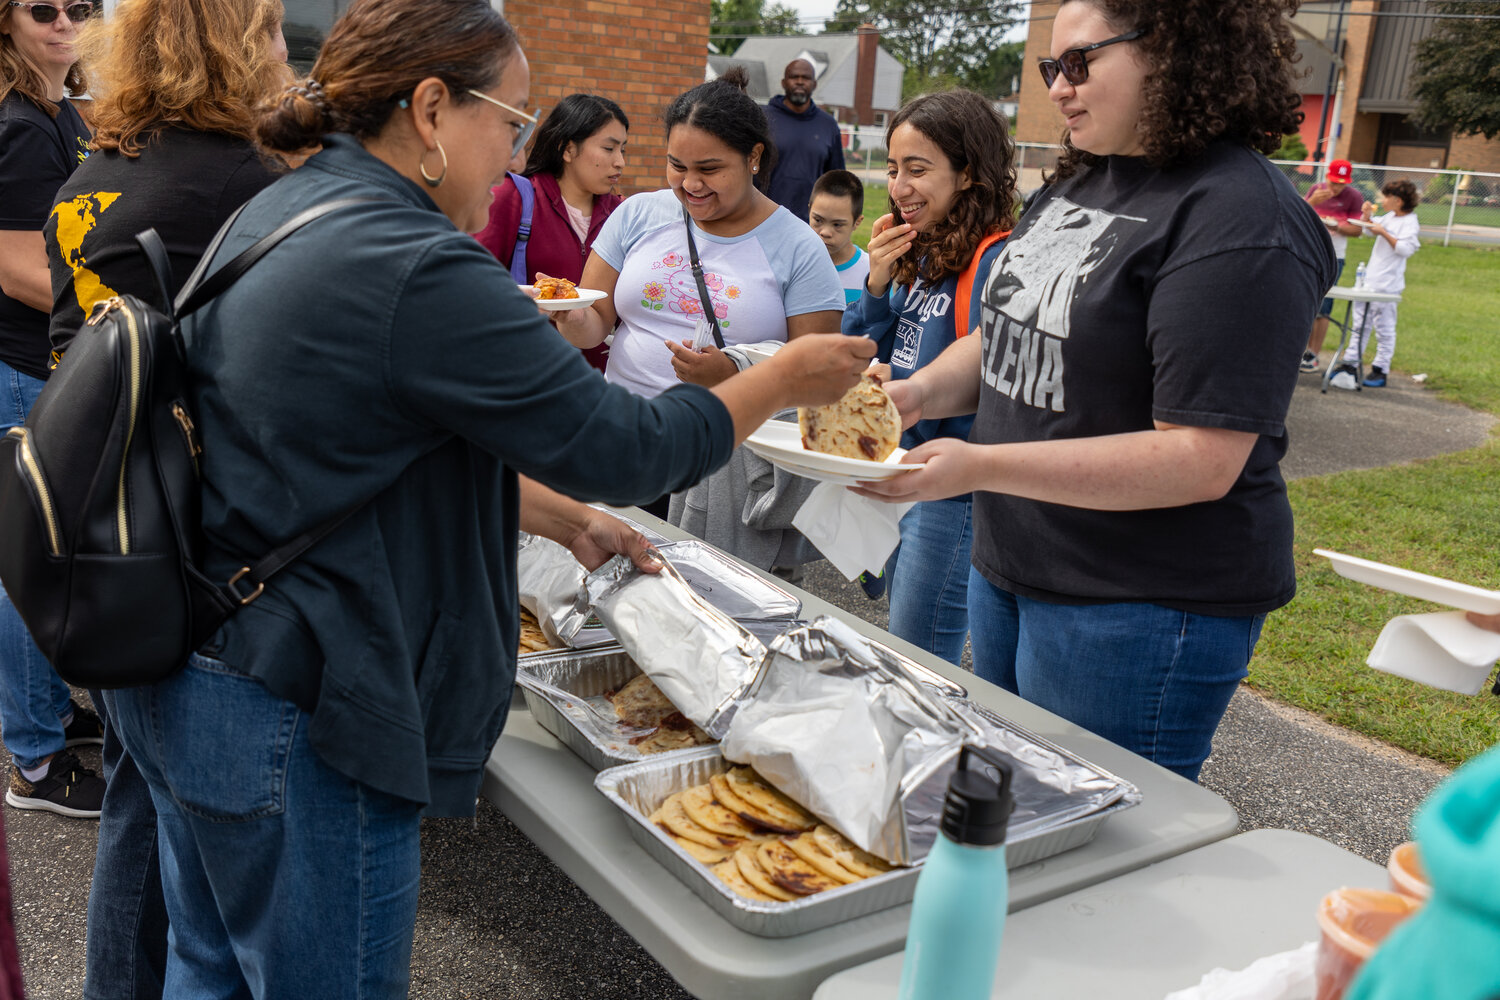 Free food being handed out to hungry parents and children, who needed energy after running around playing soccer all morning long.